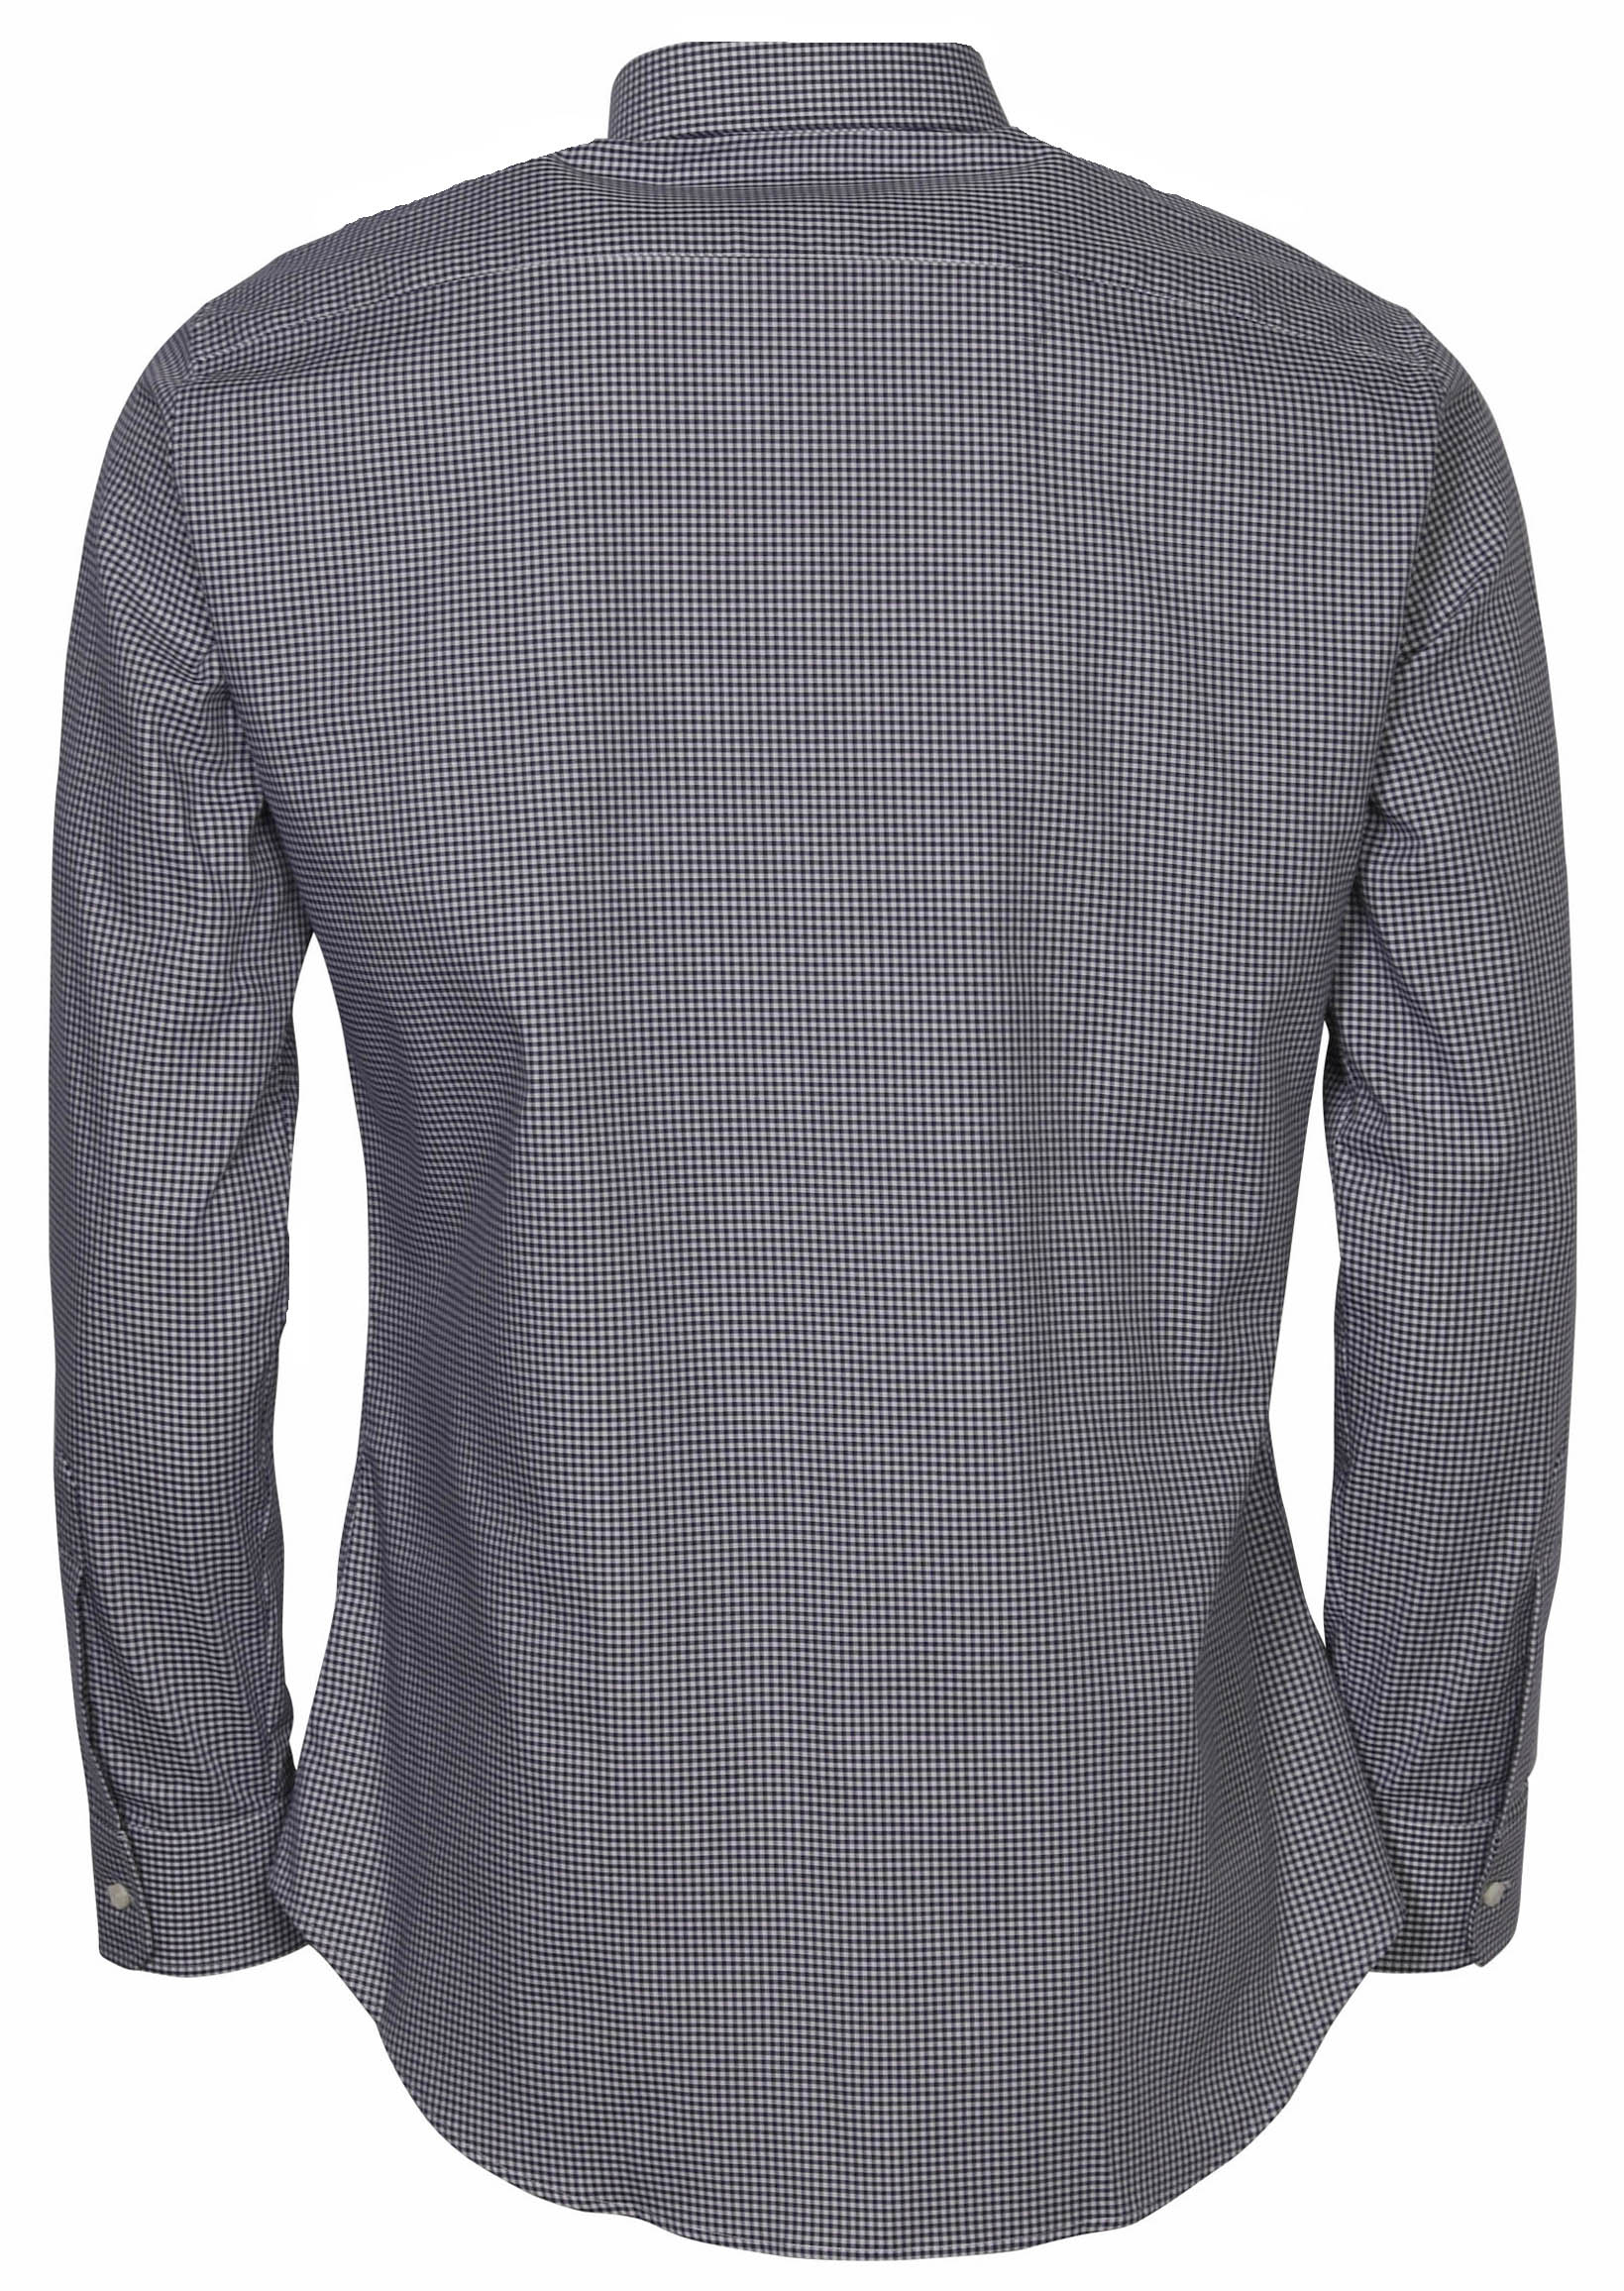 Dsquared Classic Tailored Check Shirt Navy/White